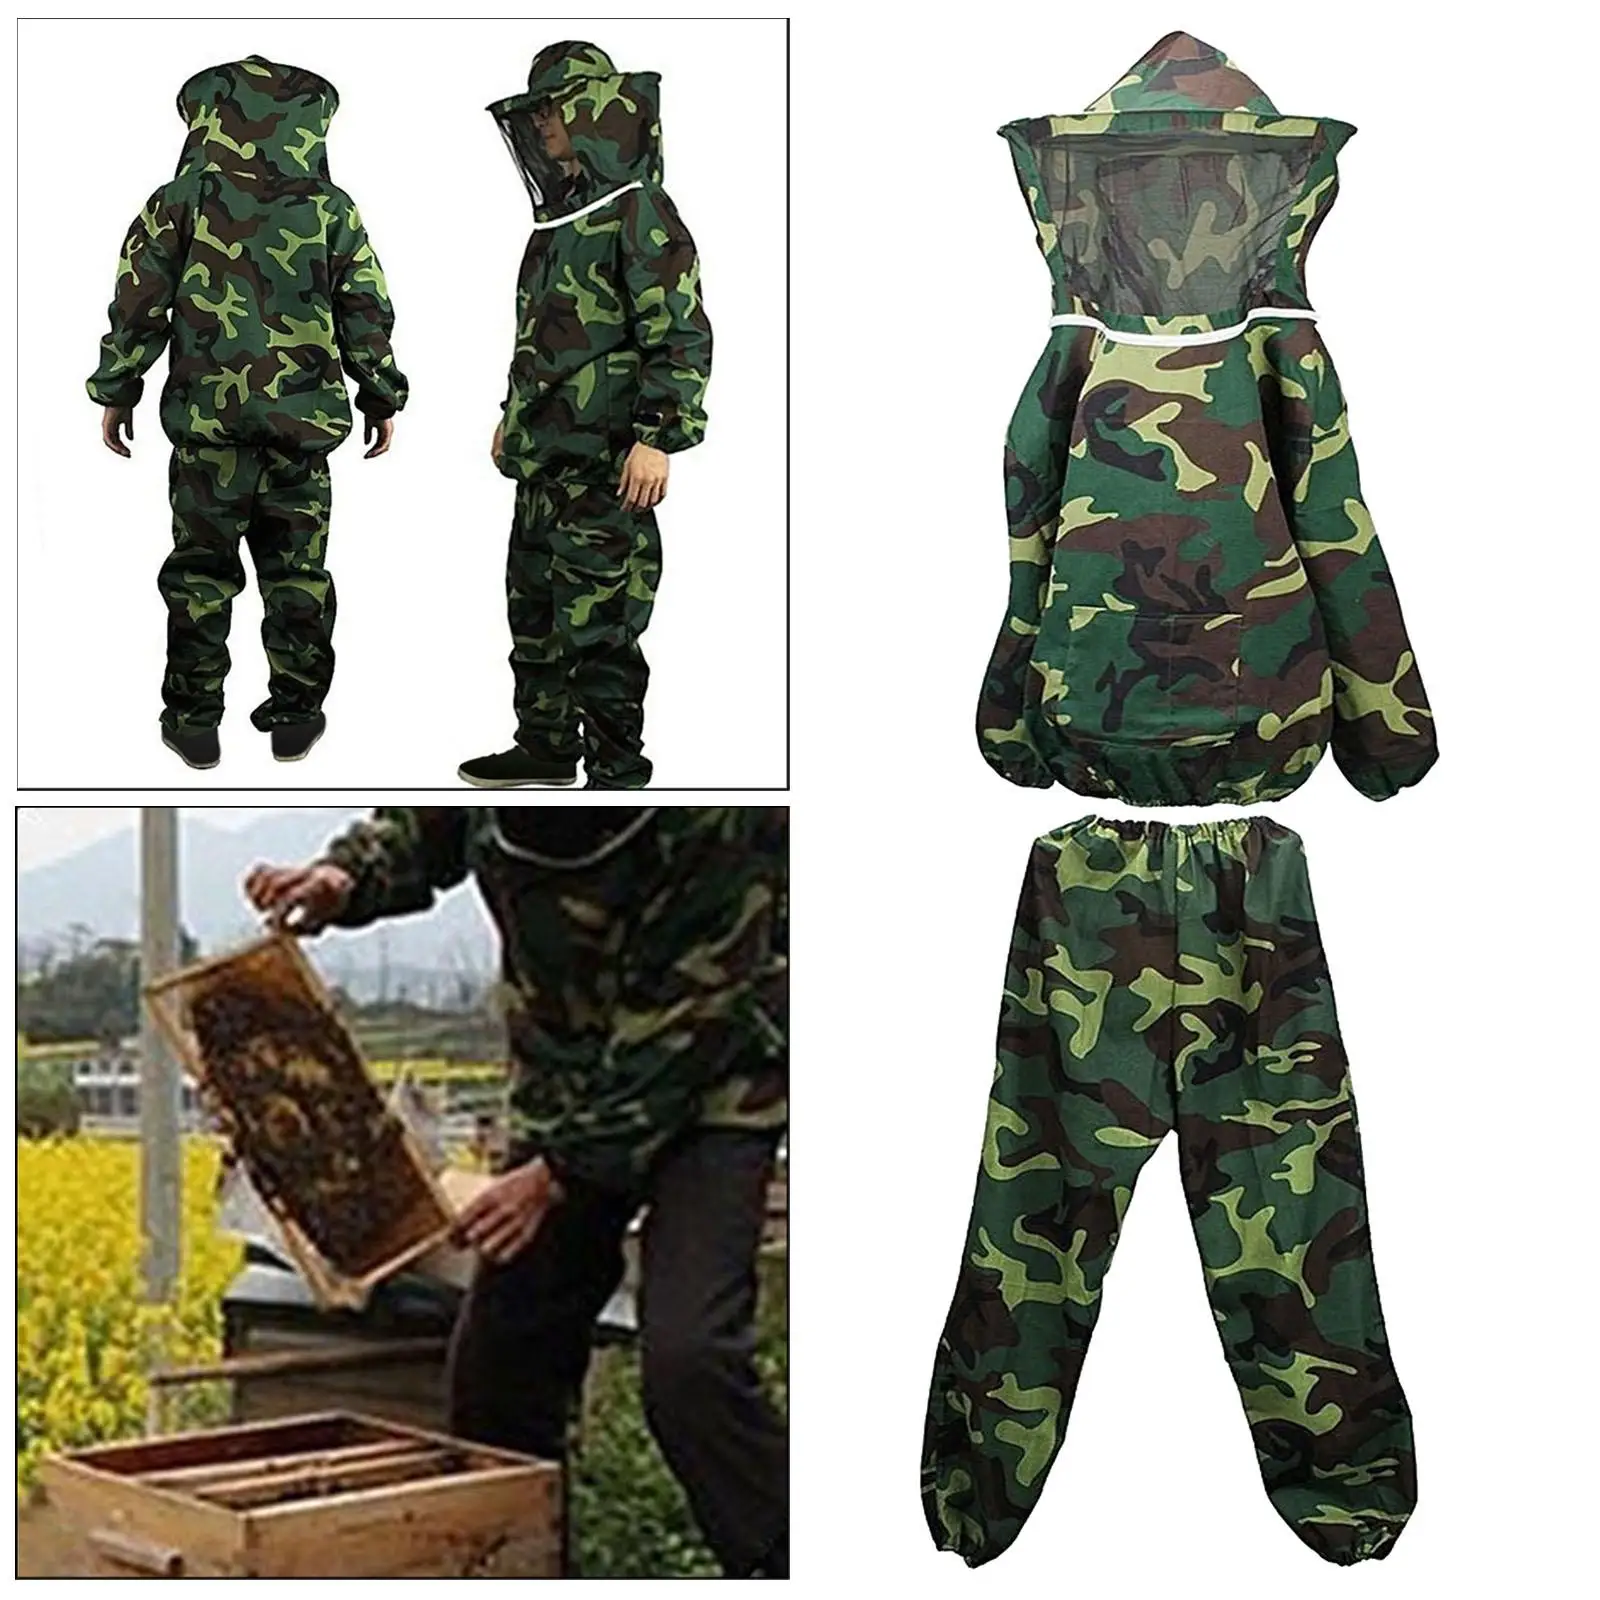 Woman Man Beekeeper Suit Breathable Beekeeper Outfit Beekeeping Protective Clothes with Veil and Pants Full Protection